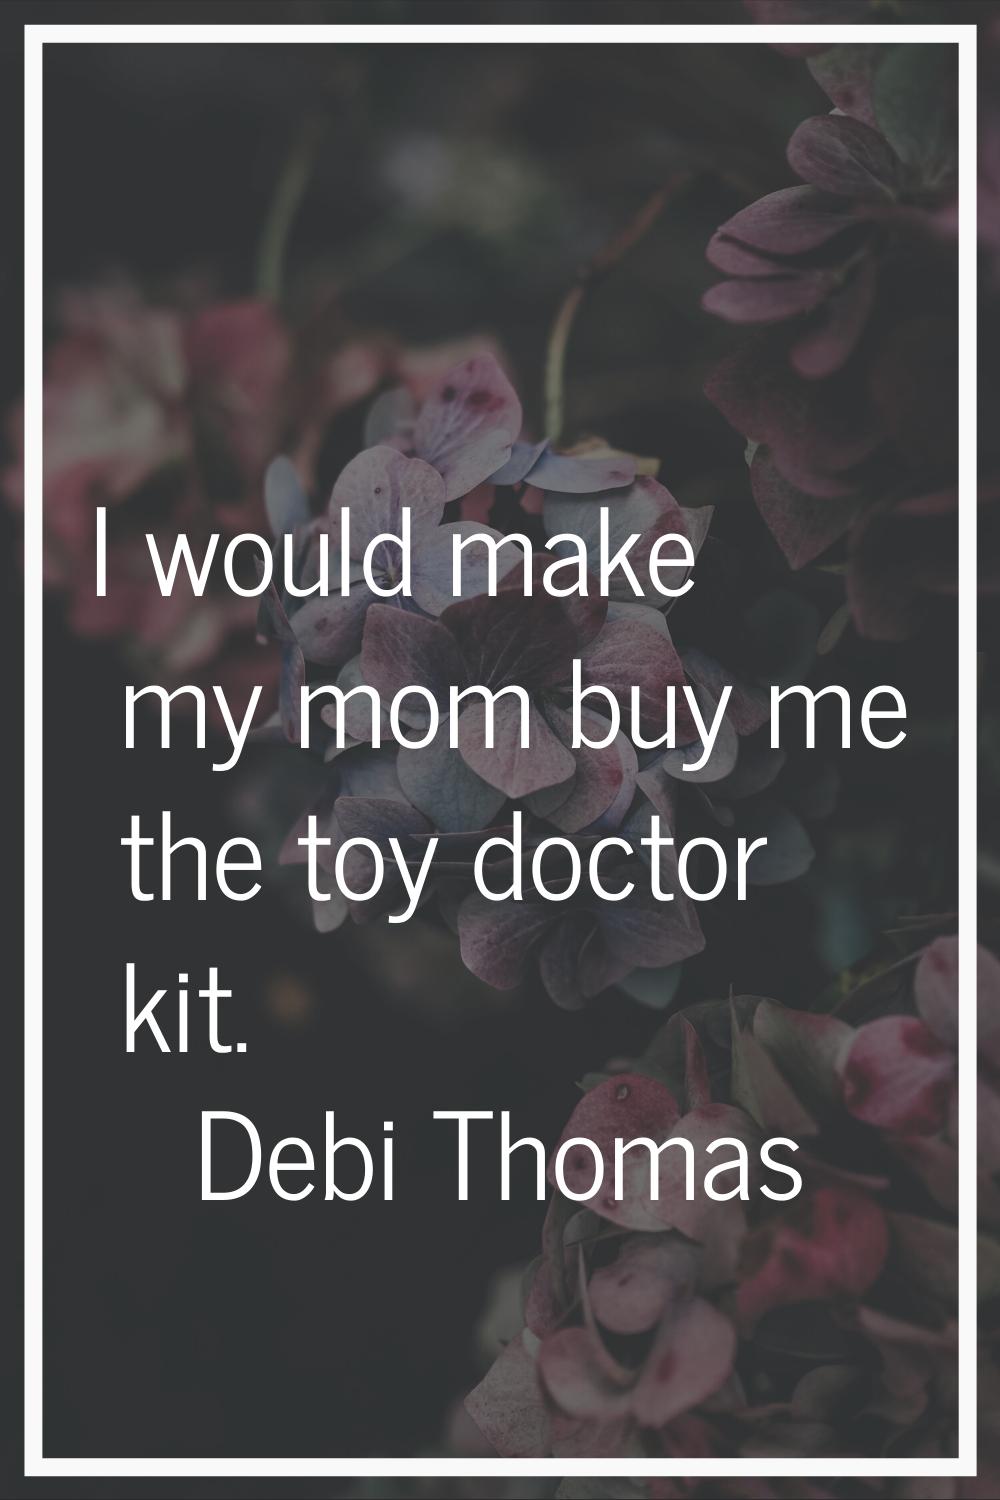 I would make my mom buy me the toy doctor kit.